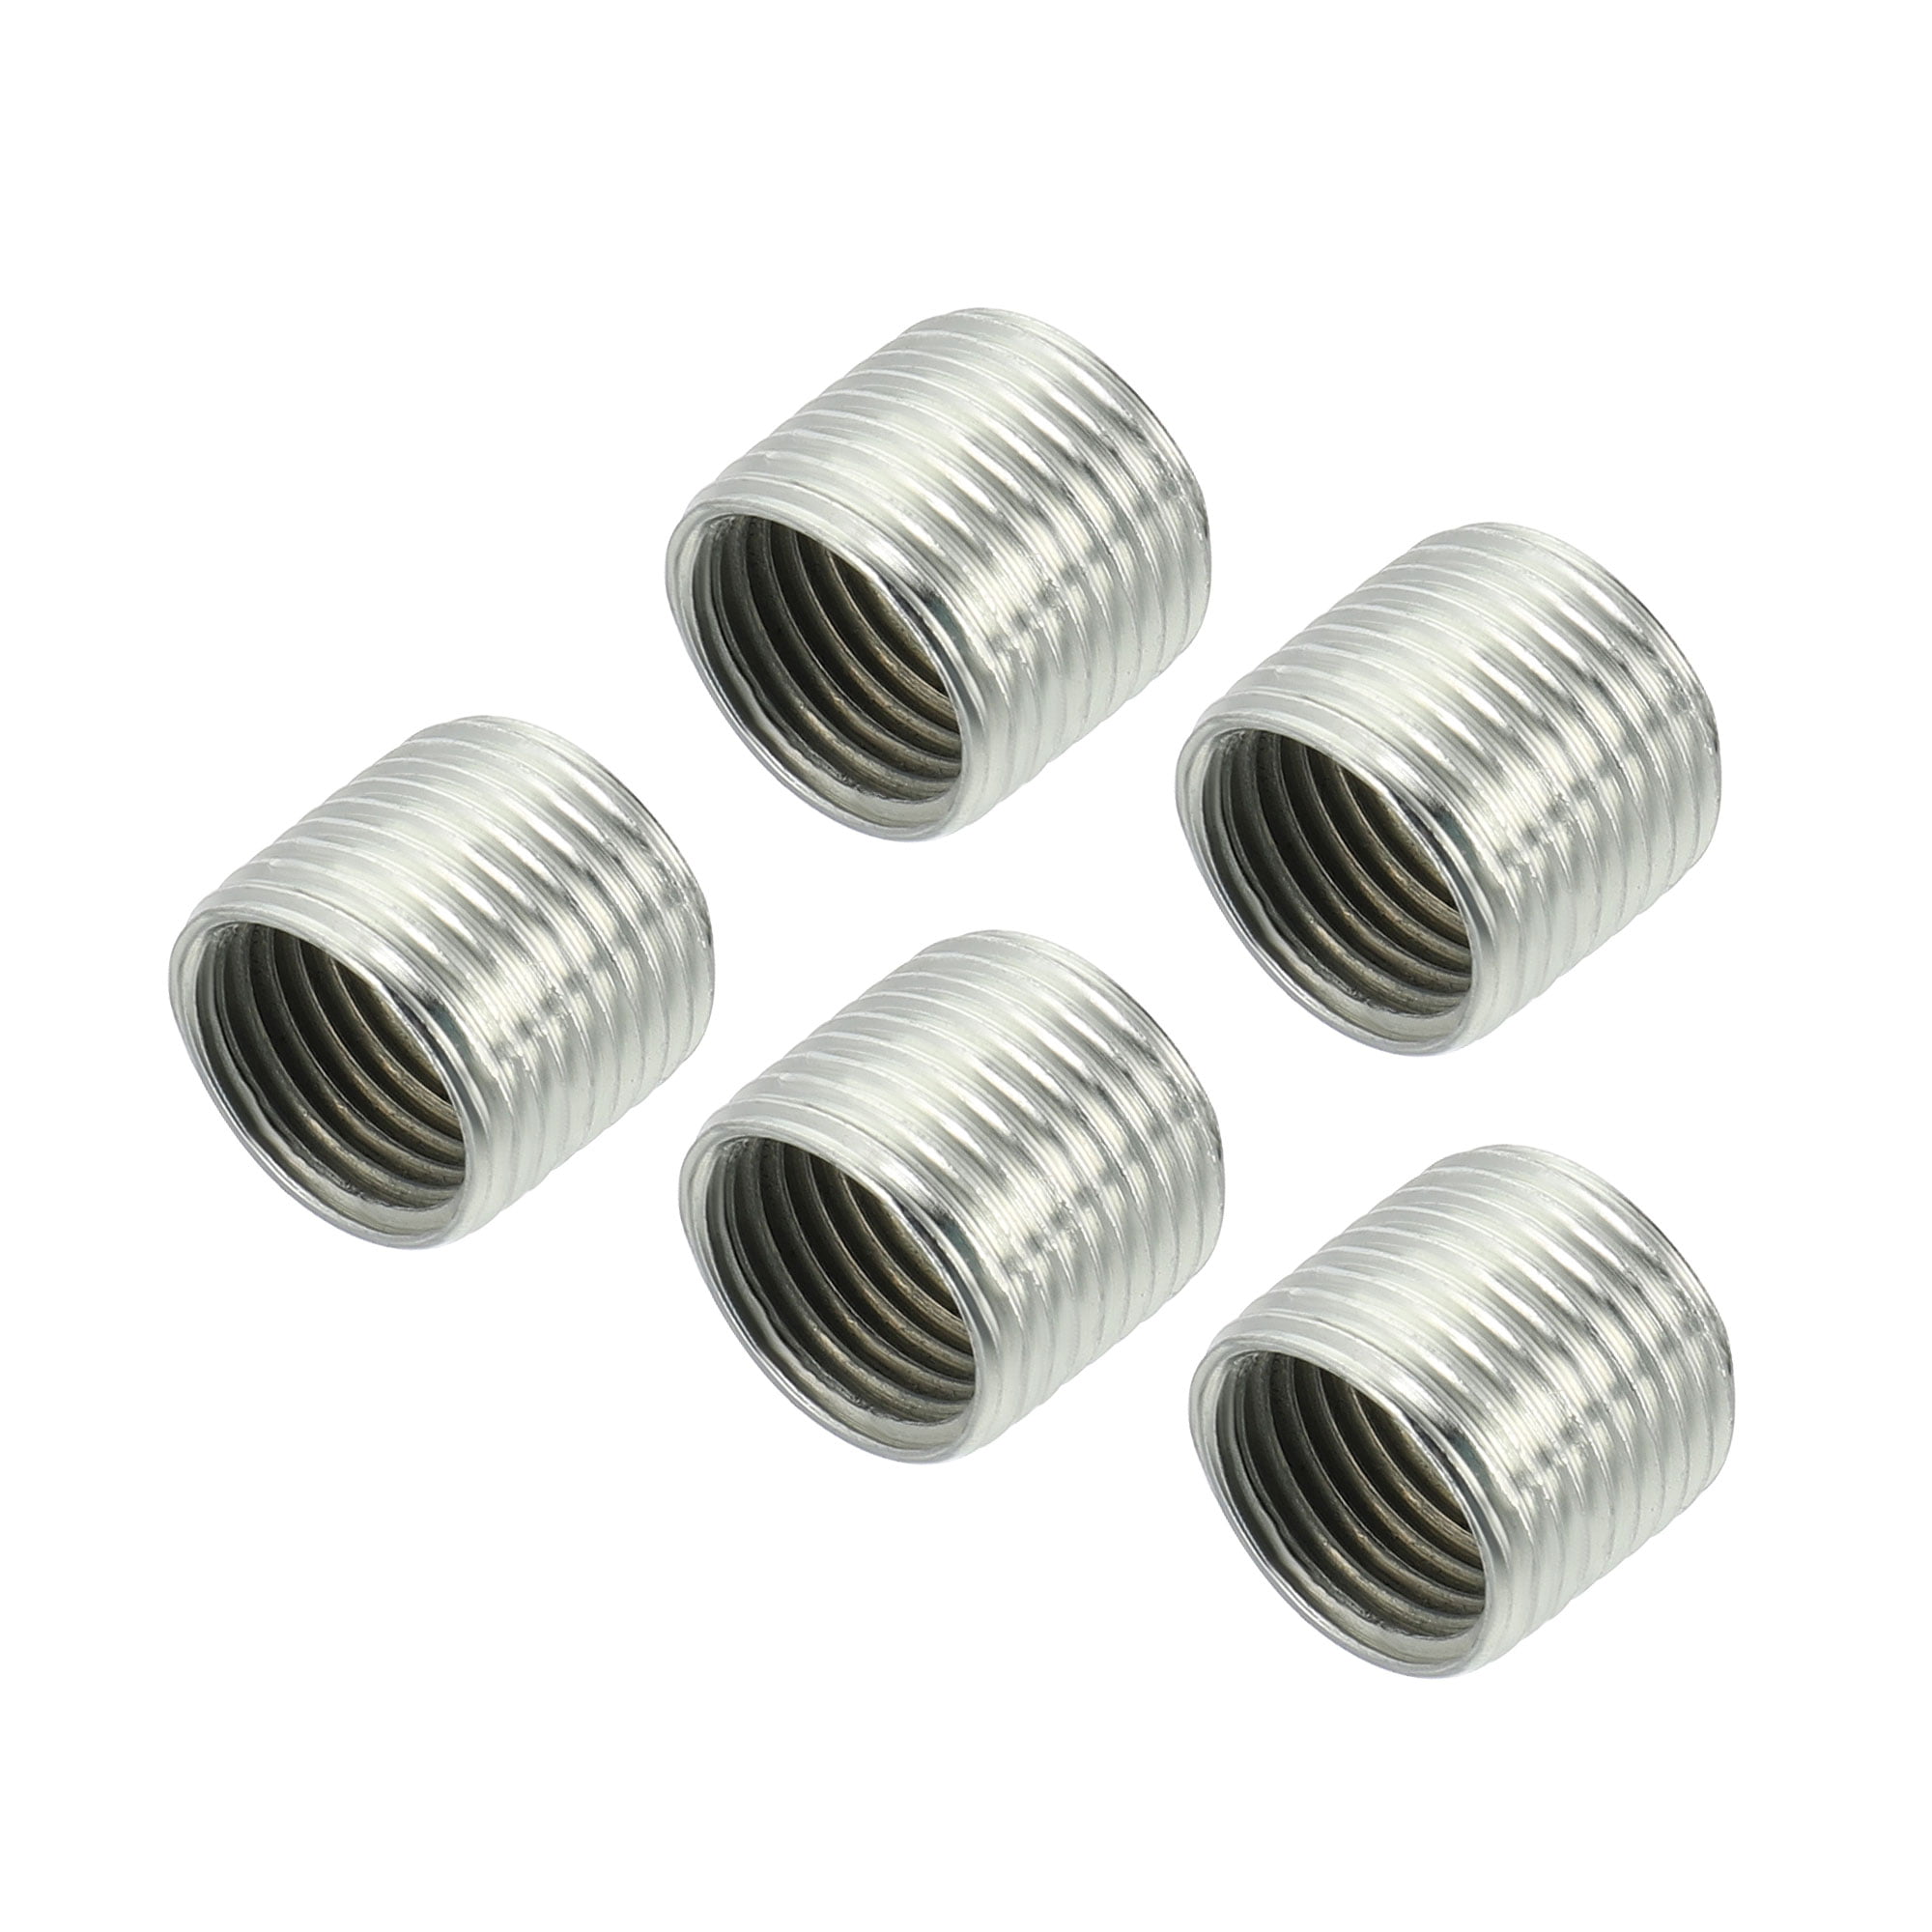 THREADED REDUCERS 10 X THREAD ADAPTERS M10 10MM MALE TO M8 8MM FEMALE 